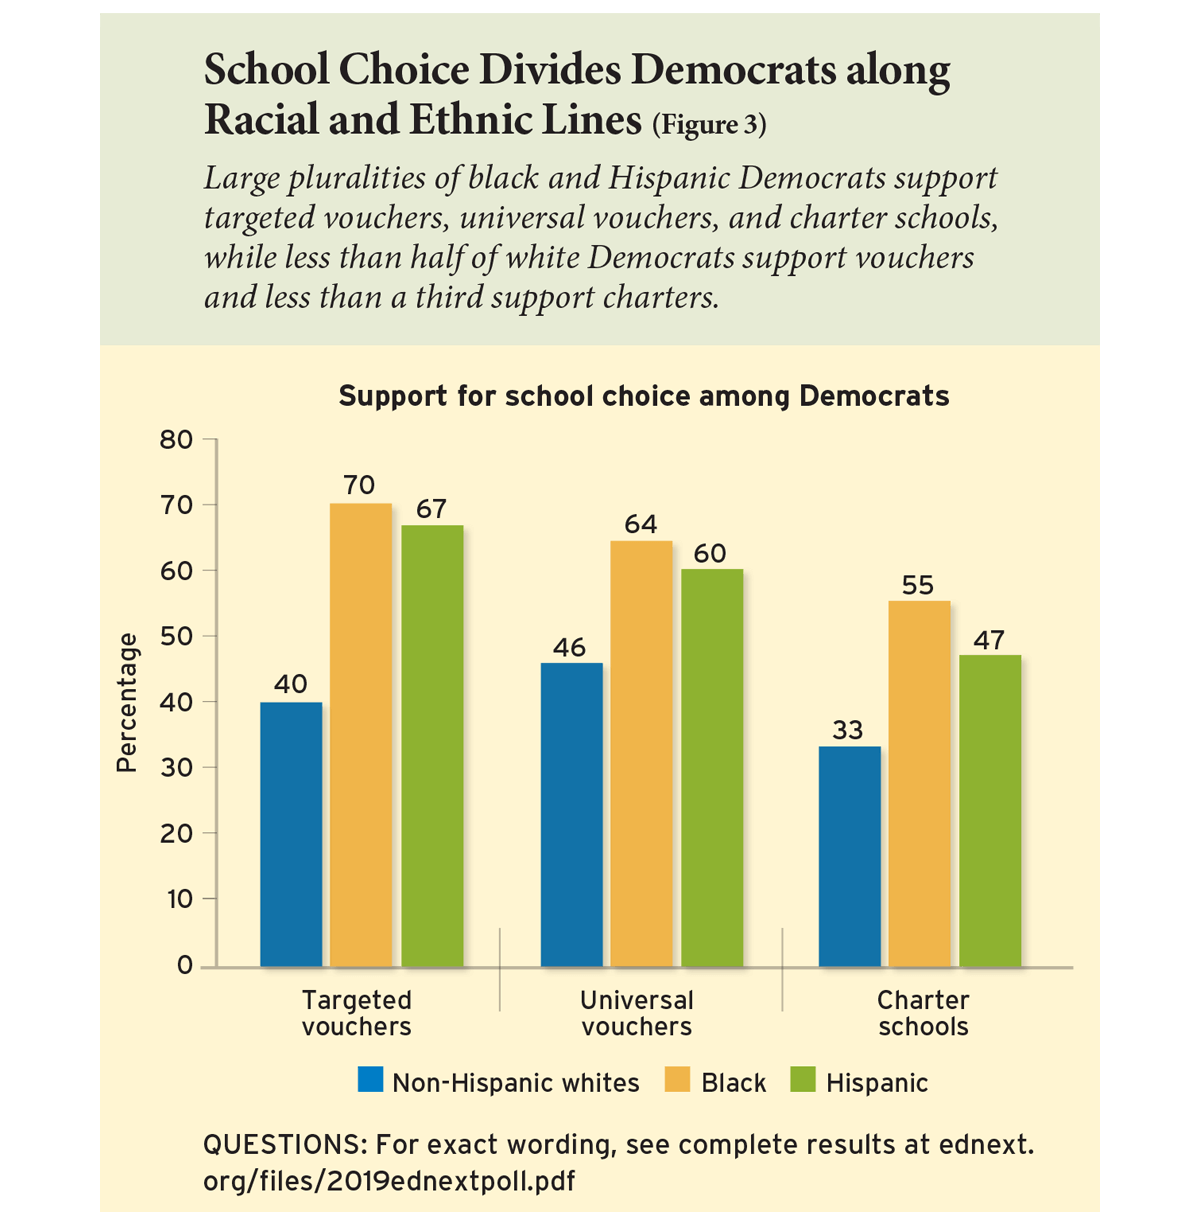 School Choice Divides Democrats along Racial and Ethnic Lines (Figure 3)